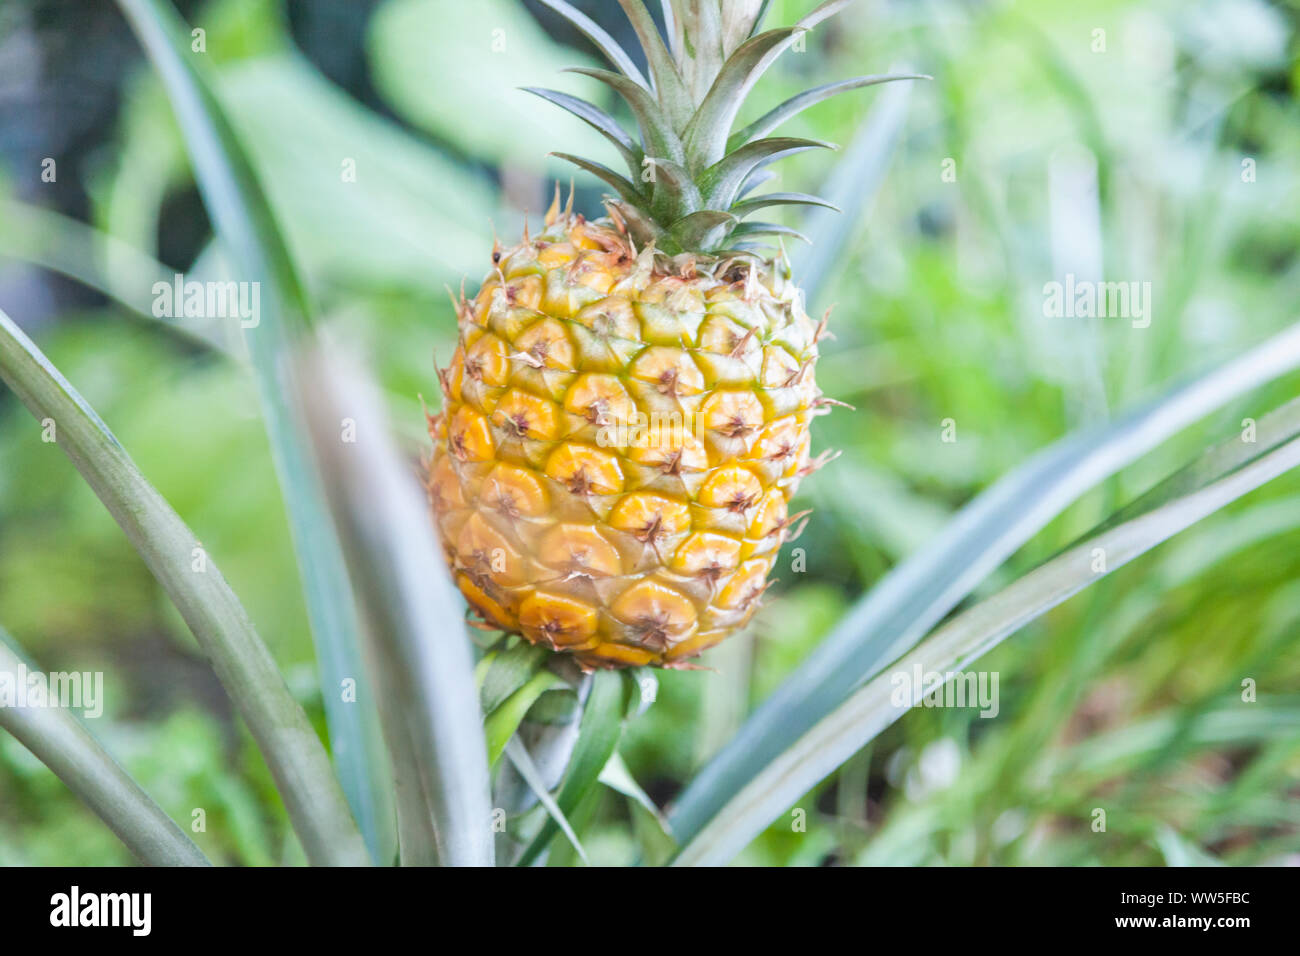 A pineapple plant with ripe fruit, (Ananas comosus) Stock Photo